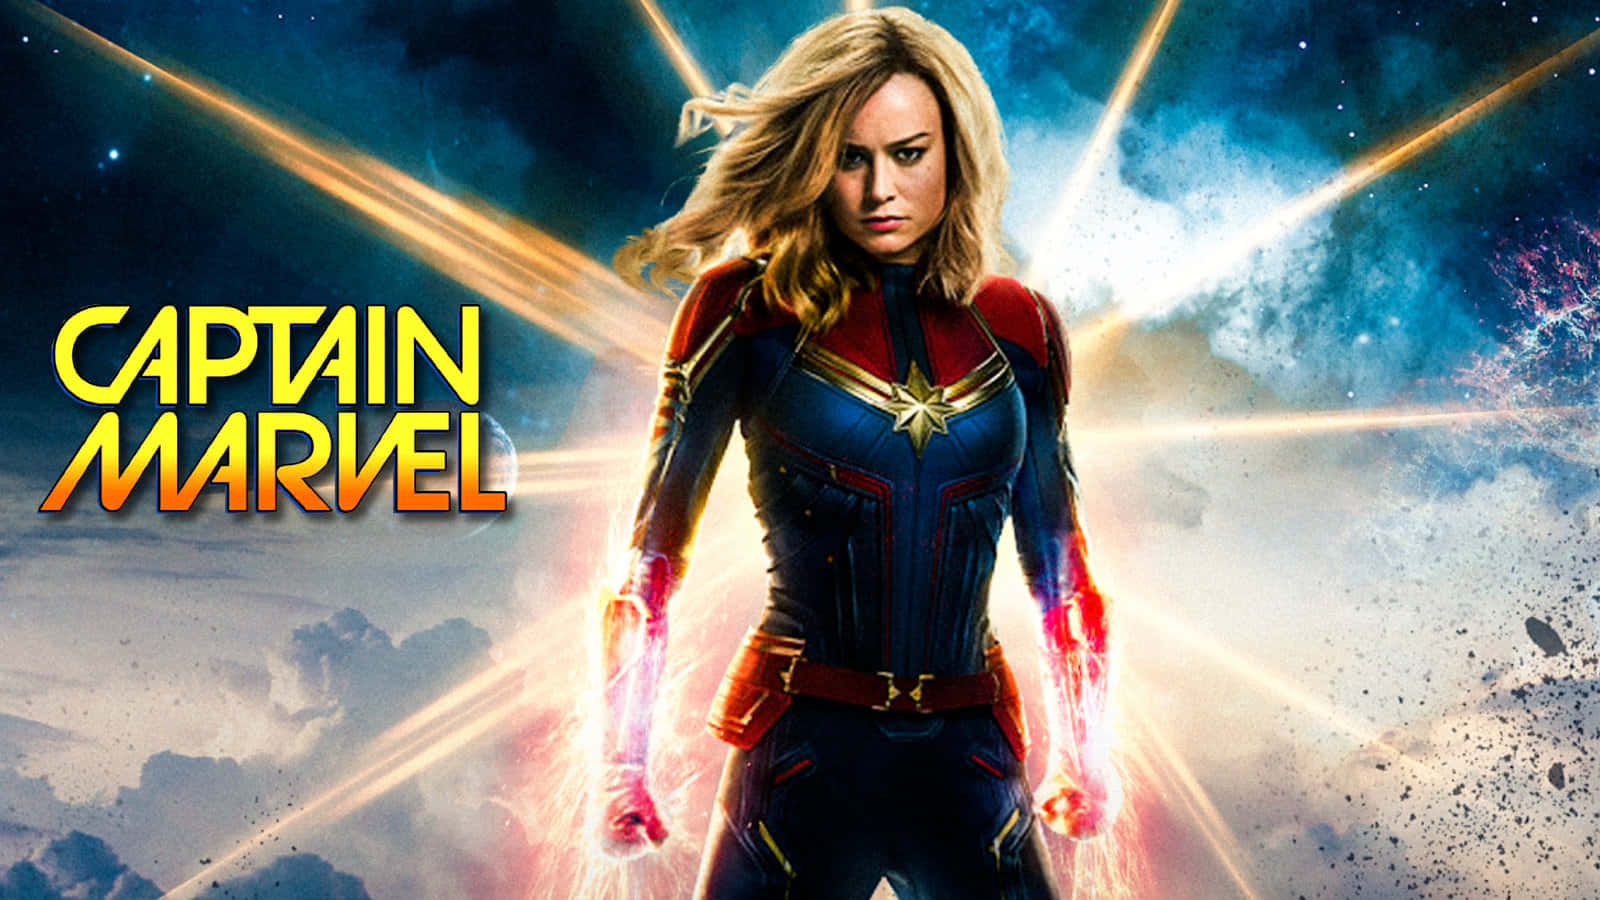 Be Bold. Be Heroic. Be The Best Captain Marvel.